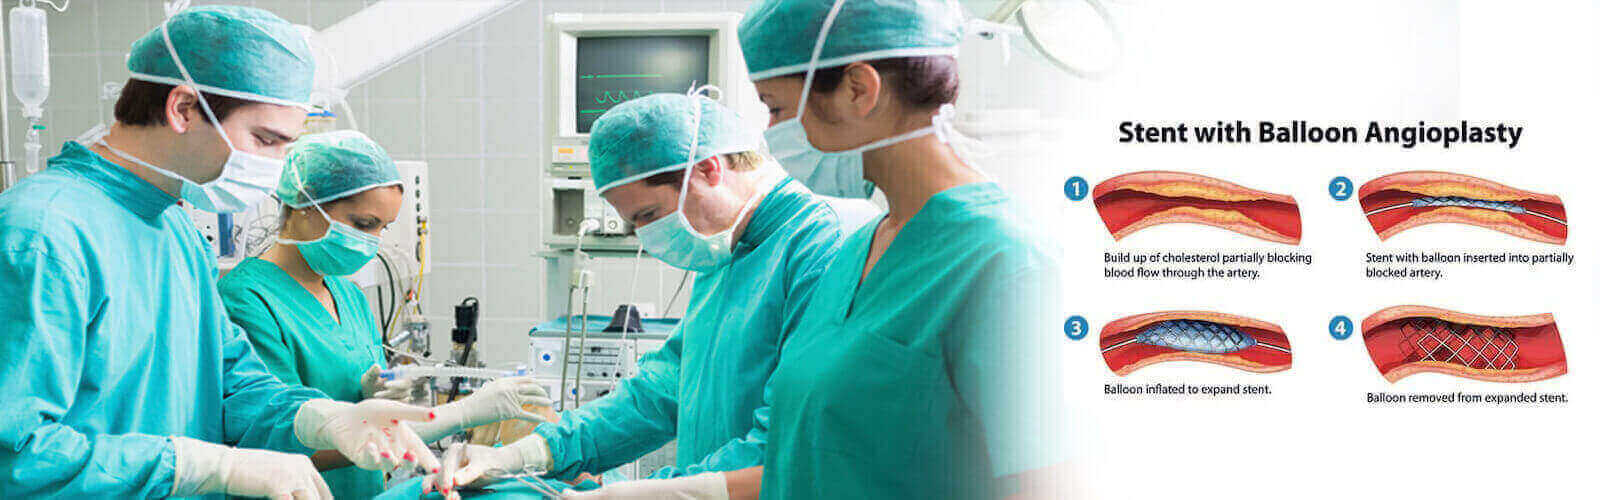 Angioplasty Surgery in Us